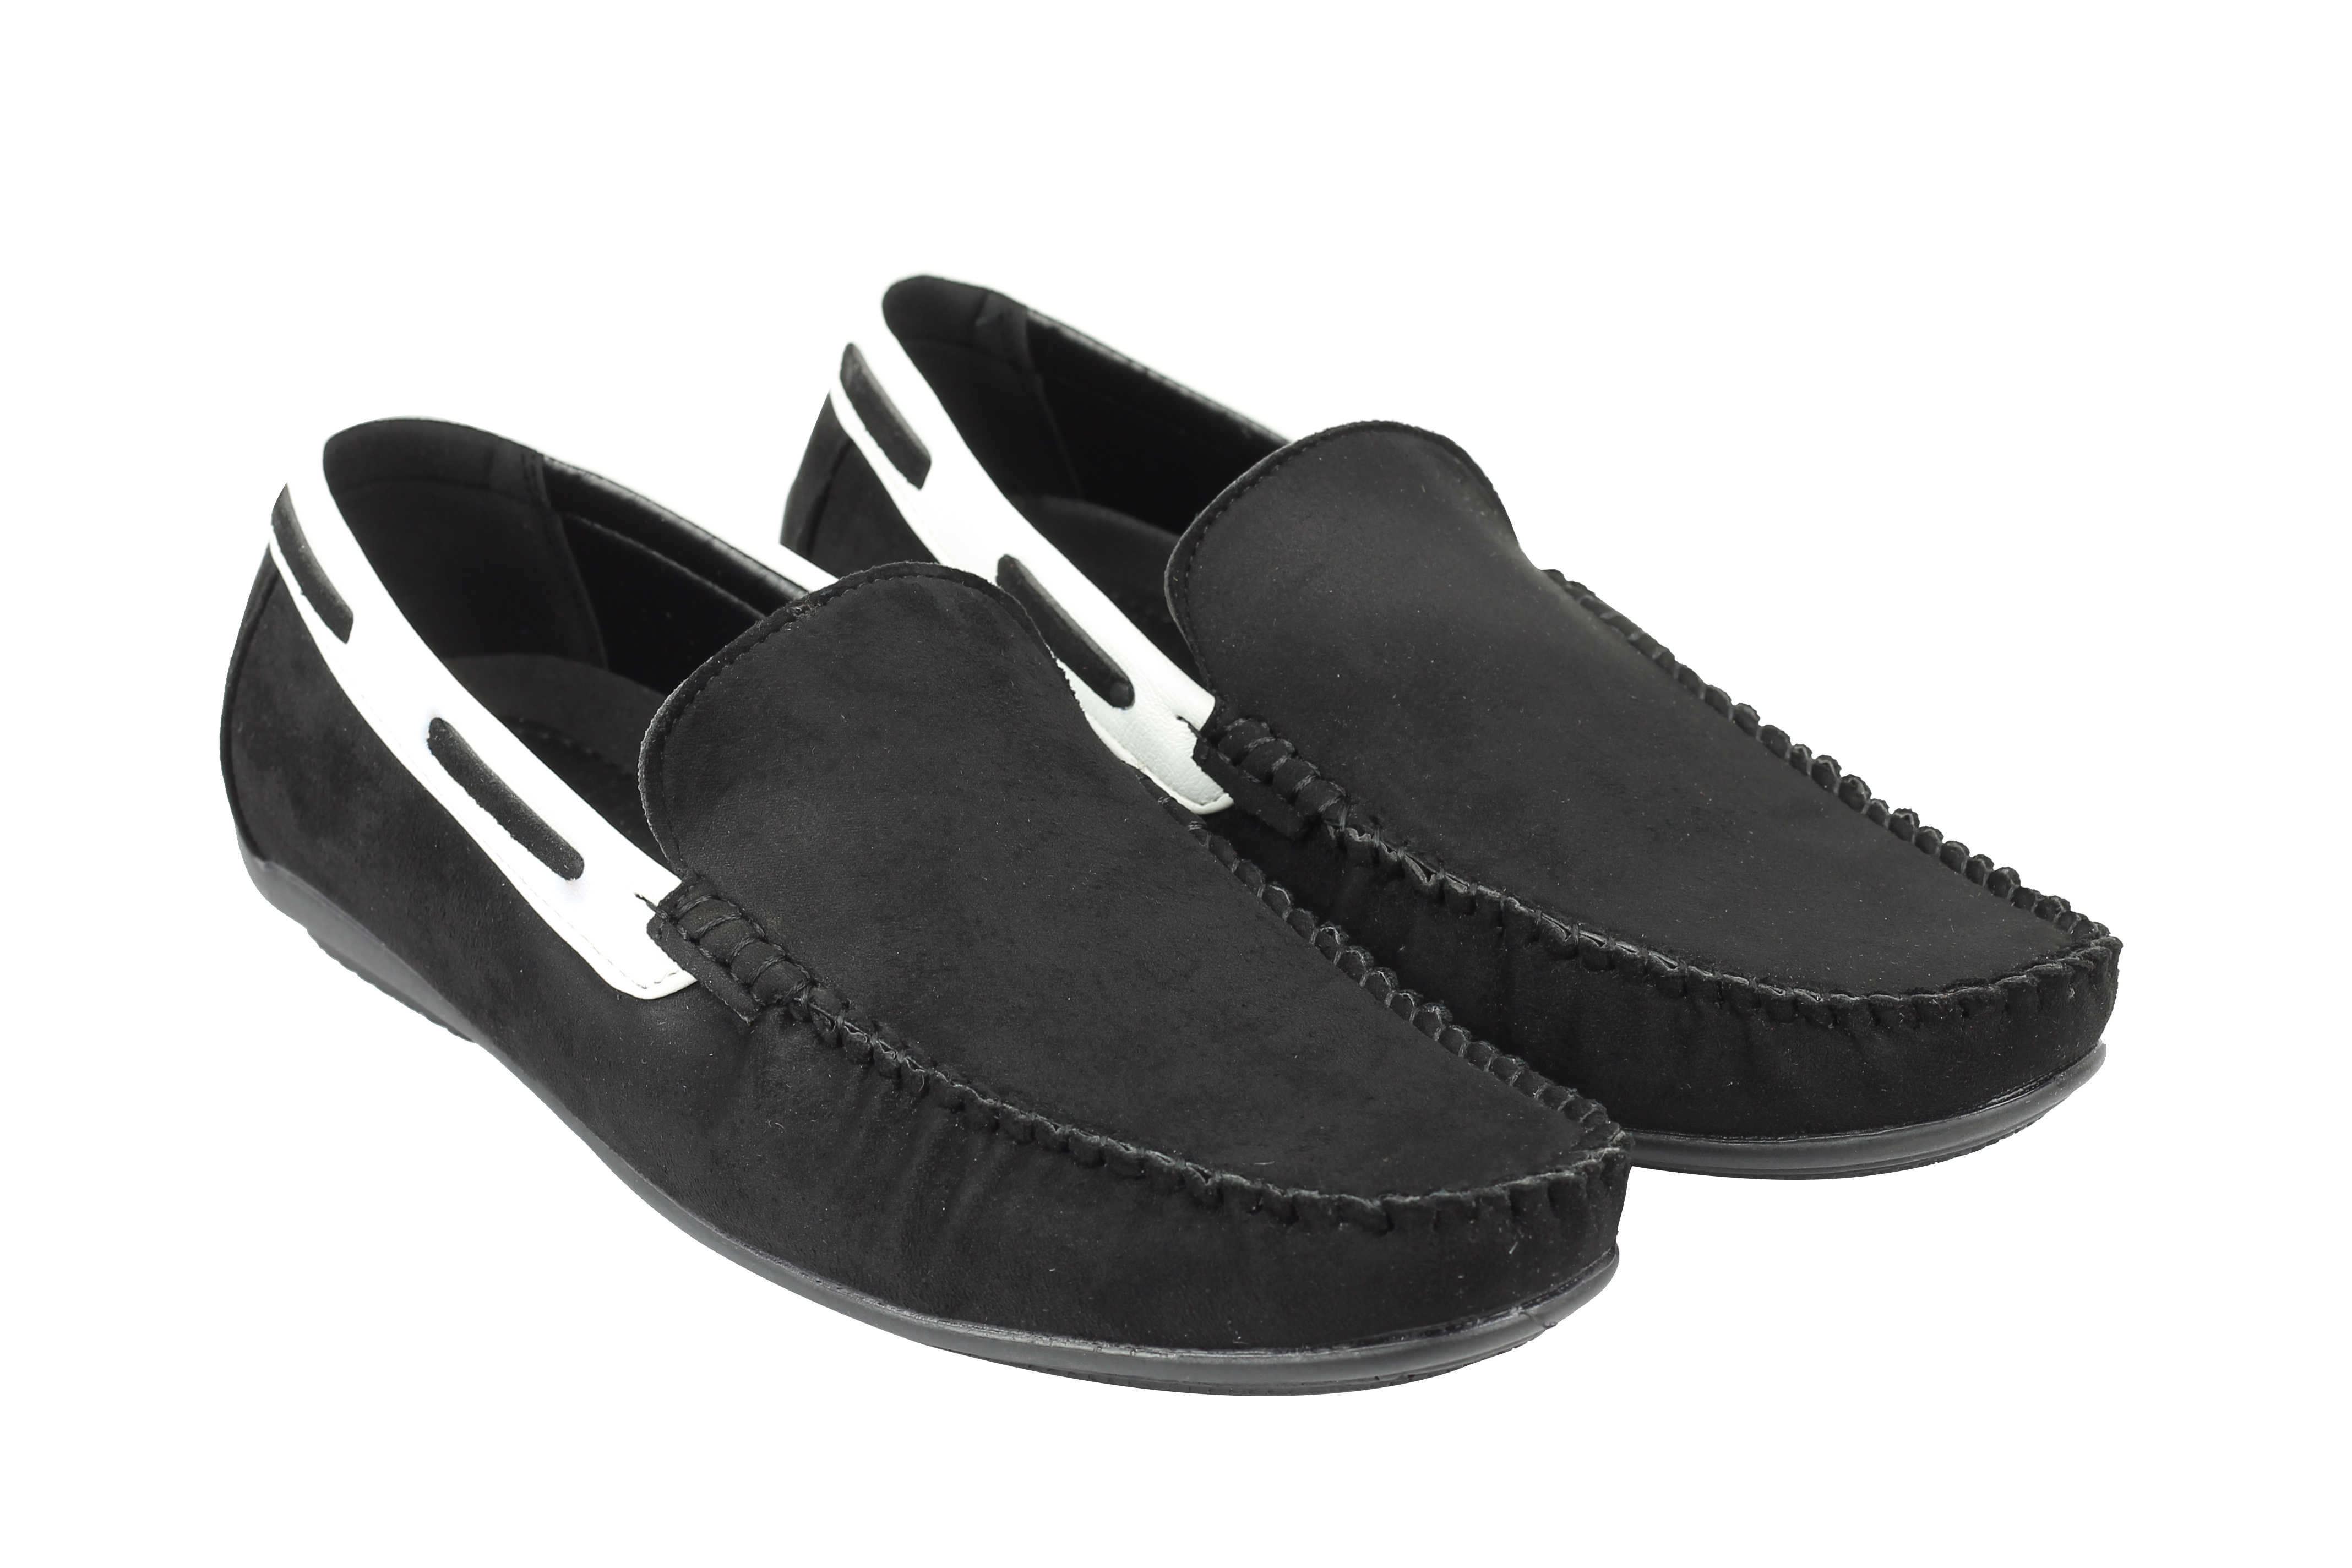 Mens Suede Faux Leather Slip on Loafers Moccasins Smart Casual Driving Shoes 